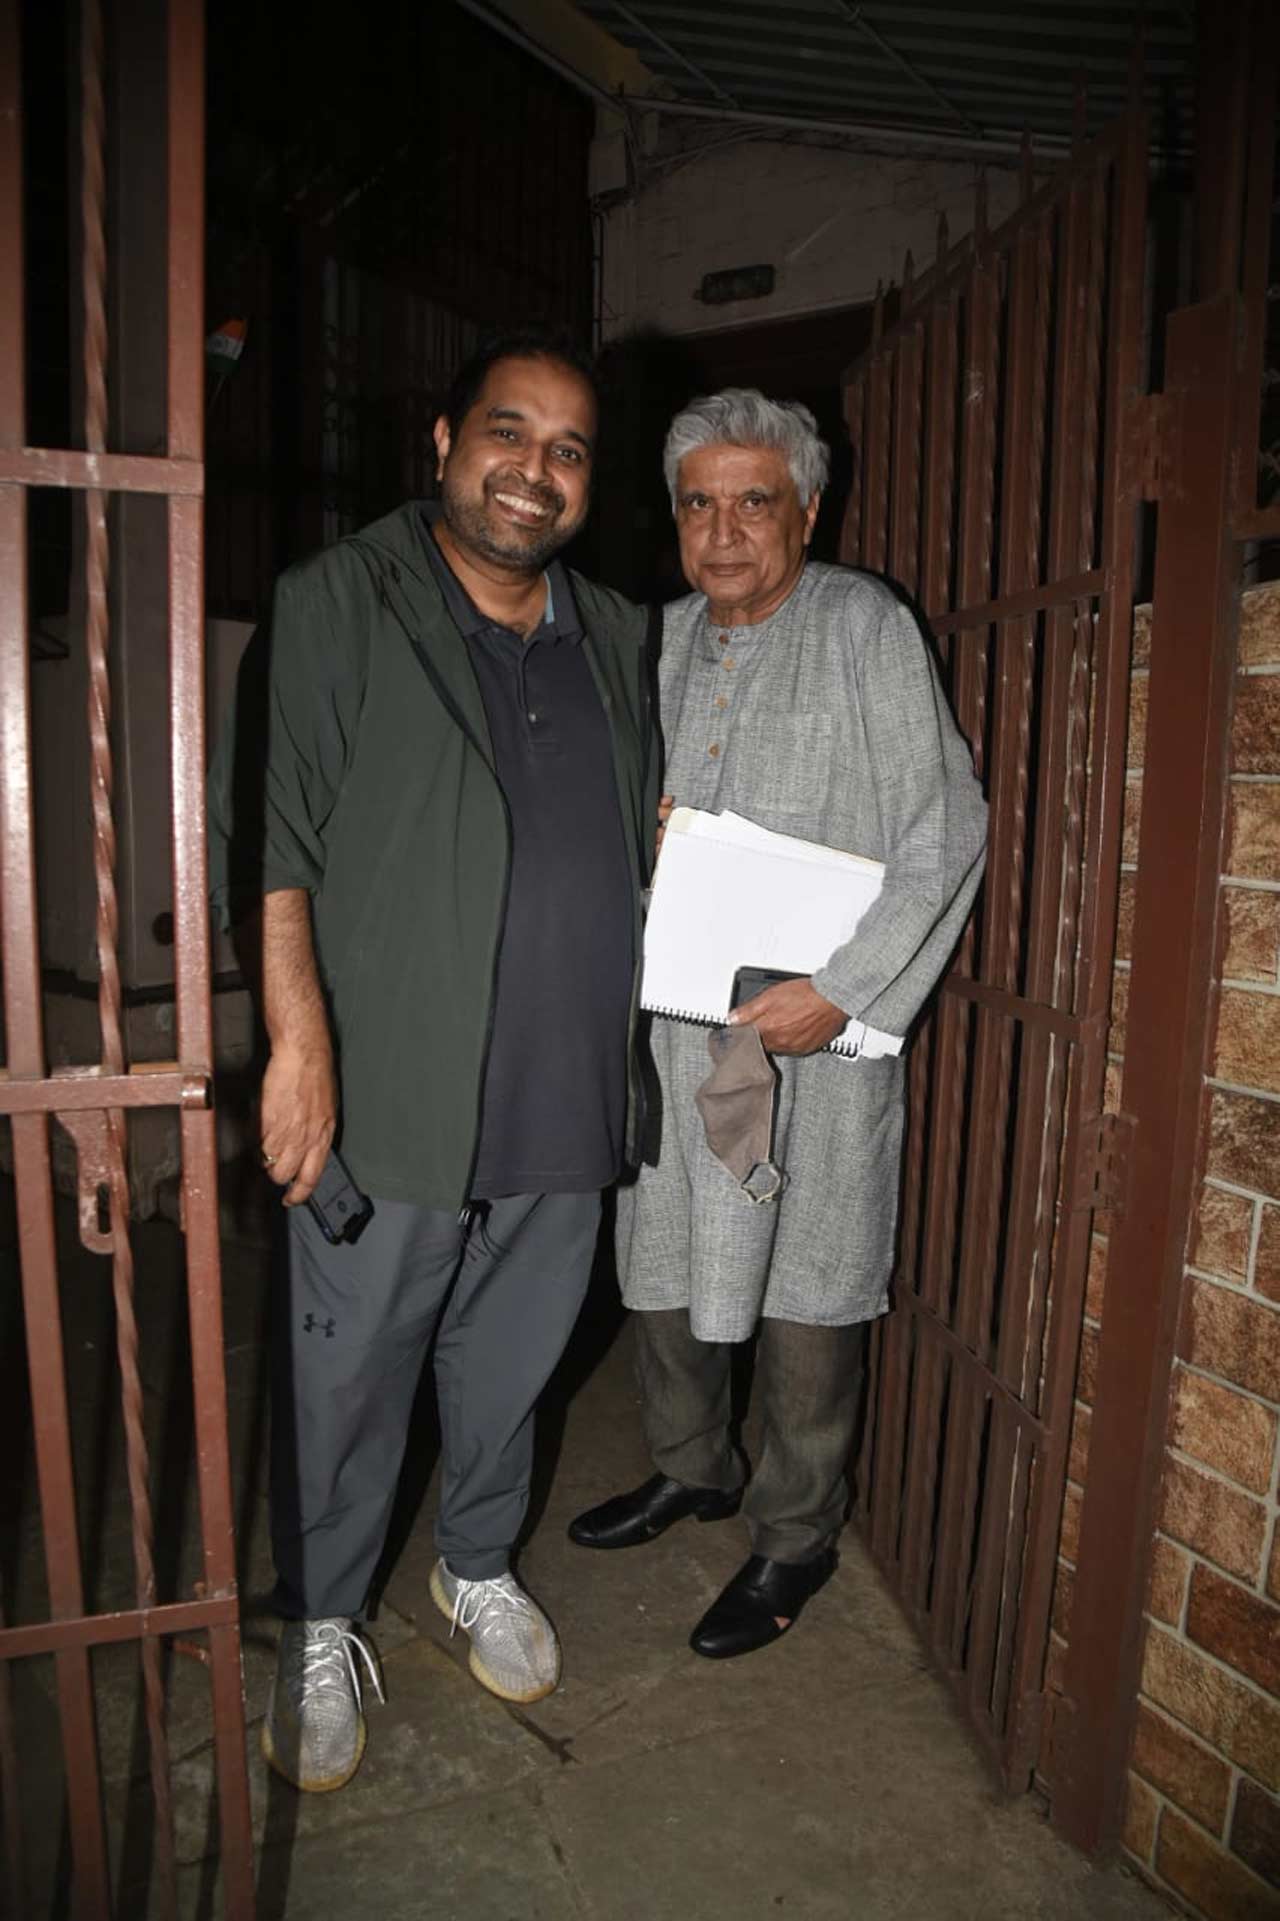 Javed Akhtar and Shankar Mahadevan were spotted in the city and needless to say, they both have had some unforgettbale collaborations, mostly with Excel Entertainment. Their collective works include titles like Dil Chahta Hai, Lakshya, Kartik Calling Kartik, Luck By Chance, and Zindagi Na Milegi Dobara. 